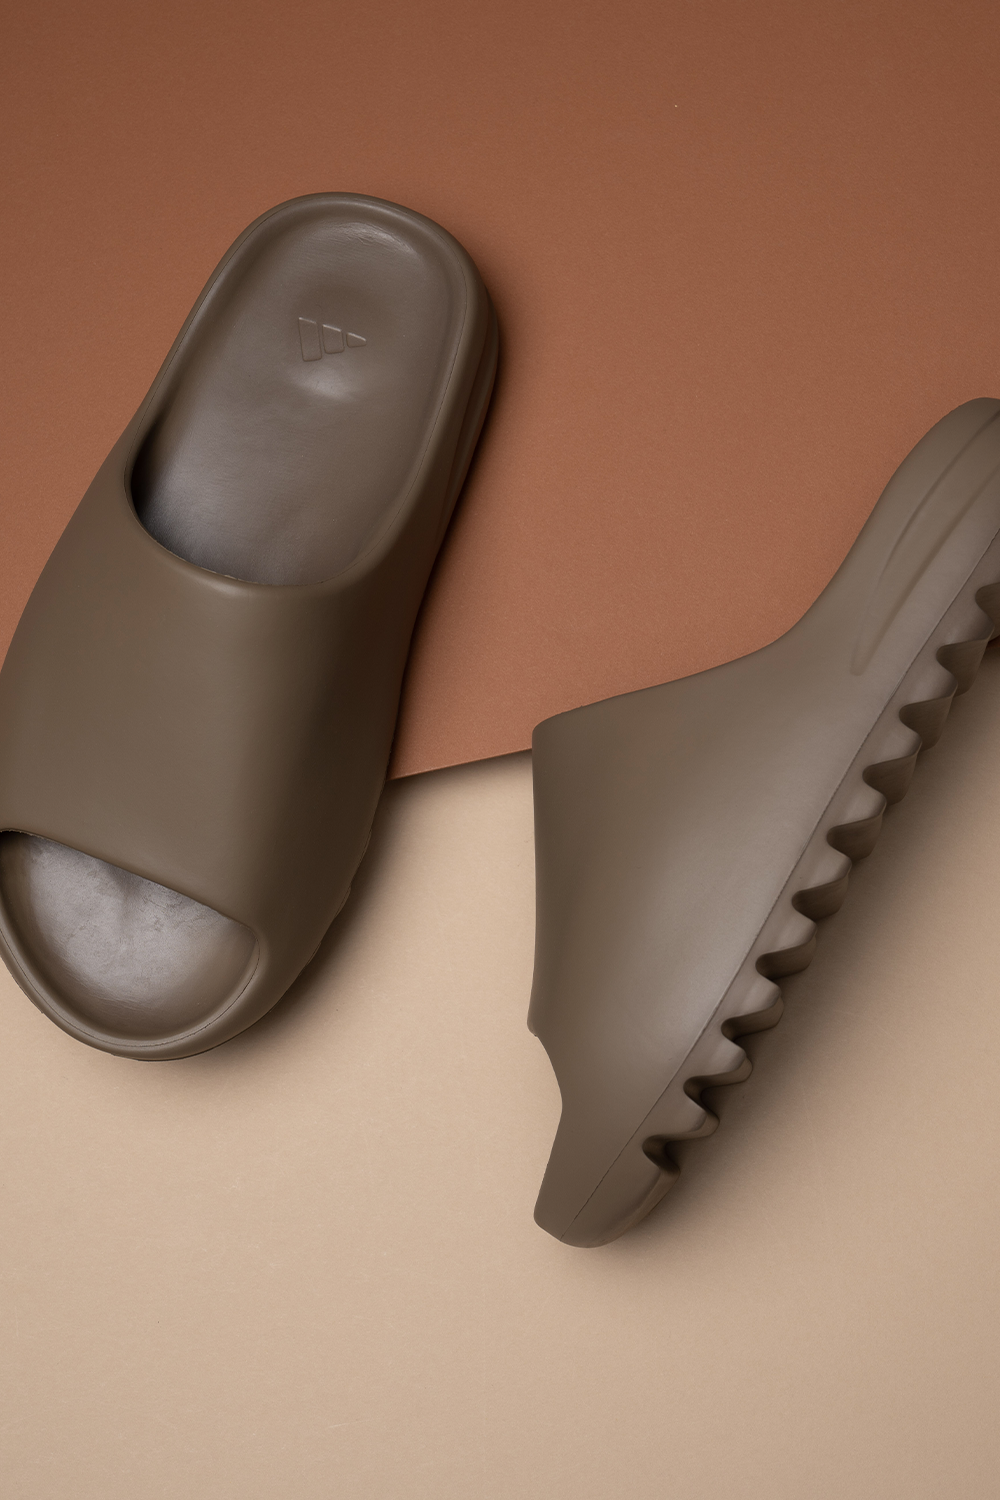 Yeezy Slide Earth Brown Goods. Hype shoes, Fashion slippers, Aesthetic shoes